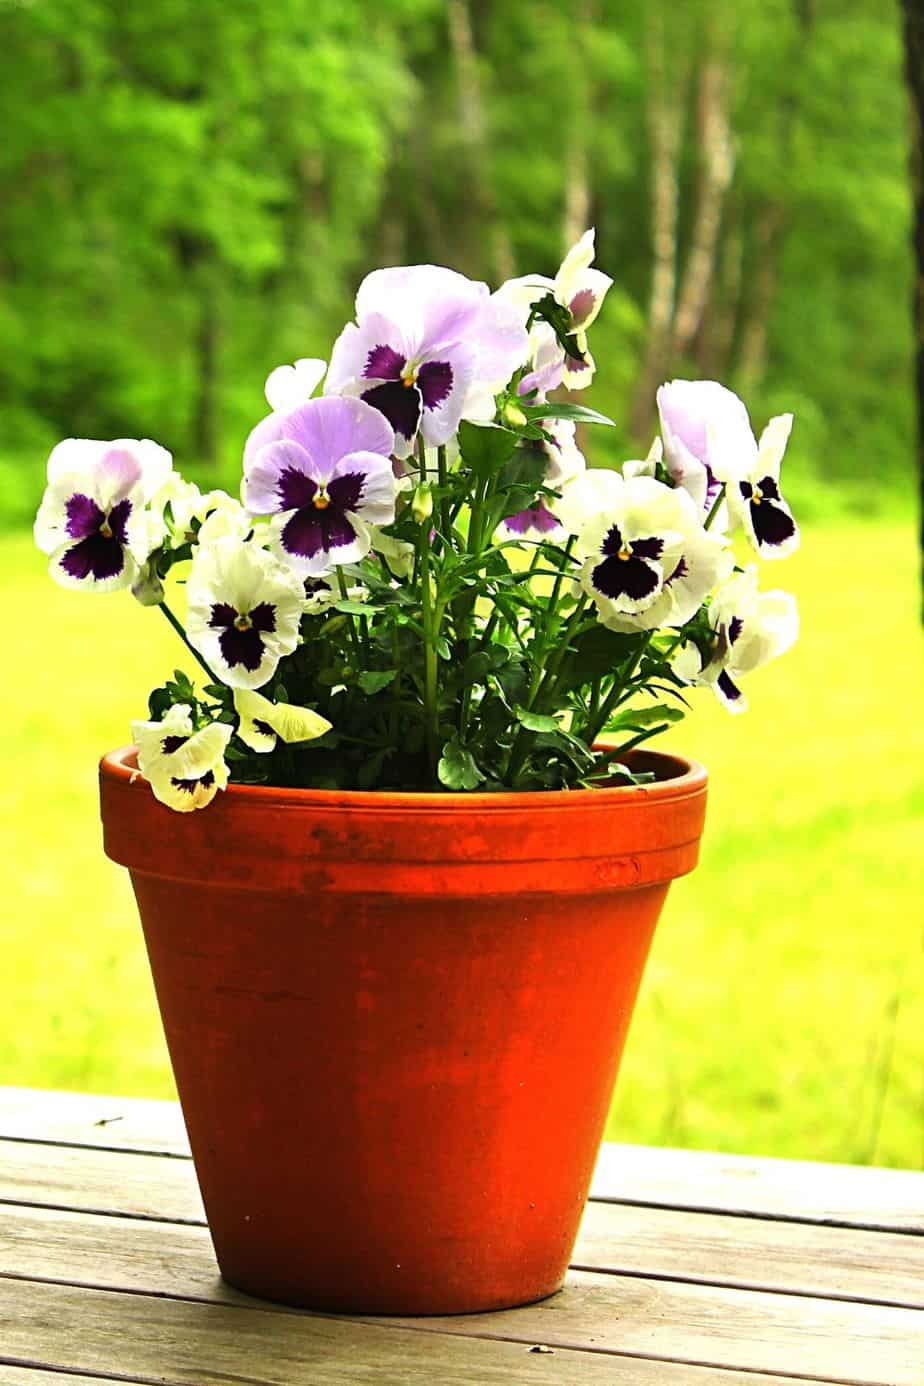 Commonly grown in gardens, Pansy can also be grown in pots on an east facing balcony